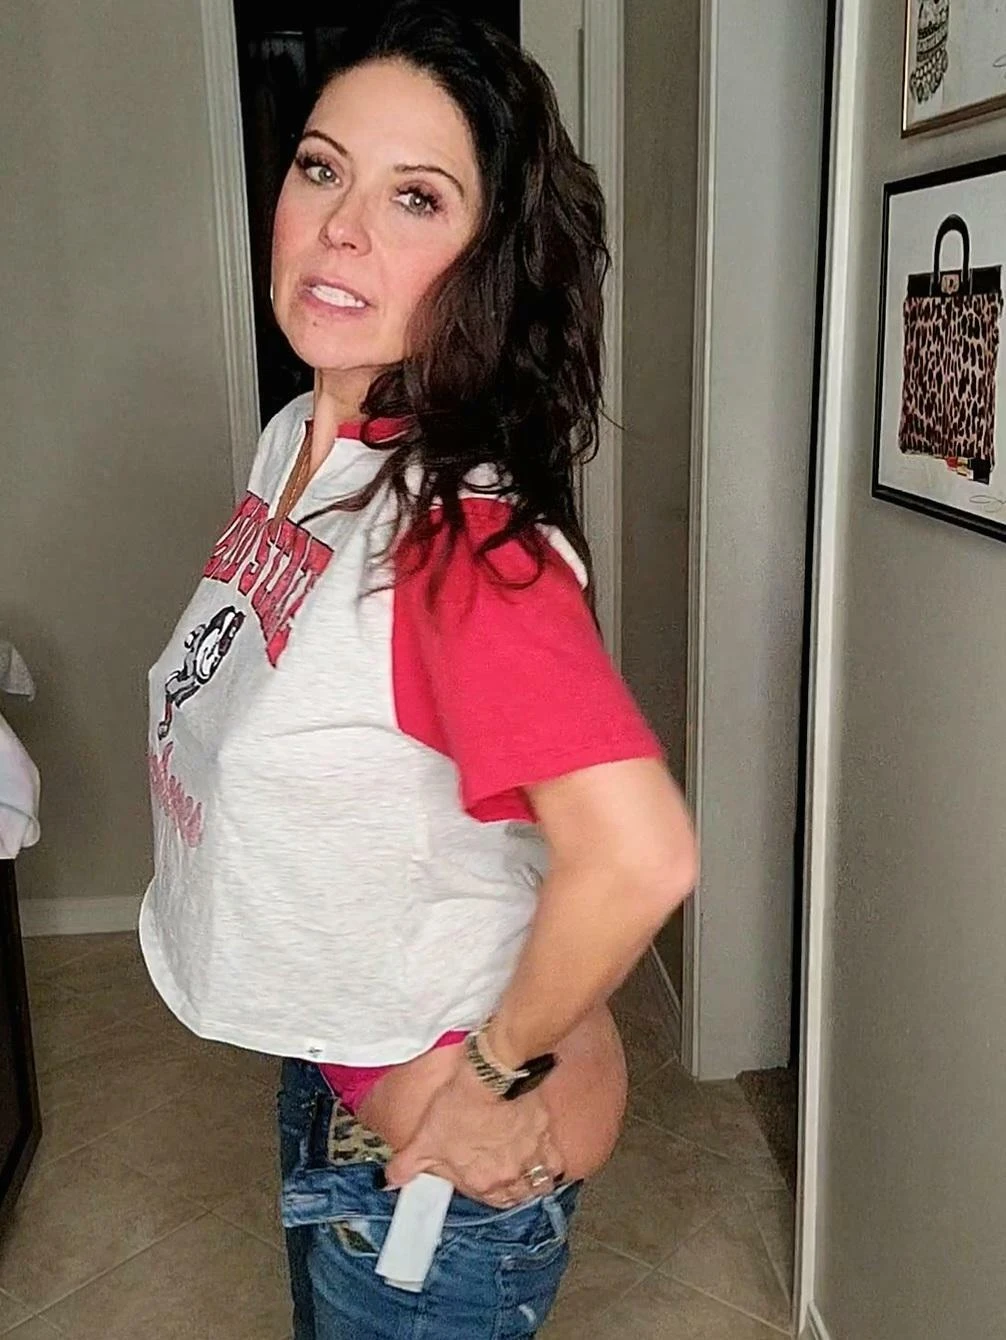 With this shirt, now I can gain access to the young men there (46F)